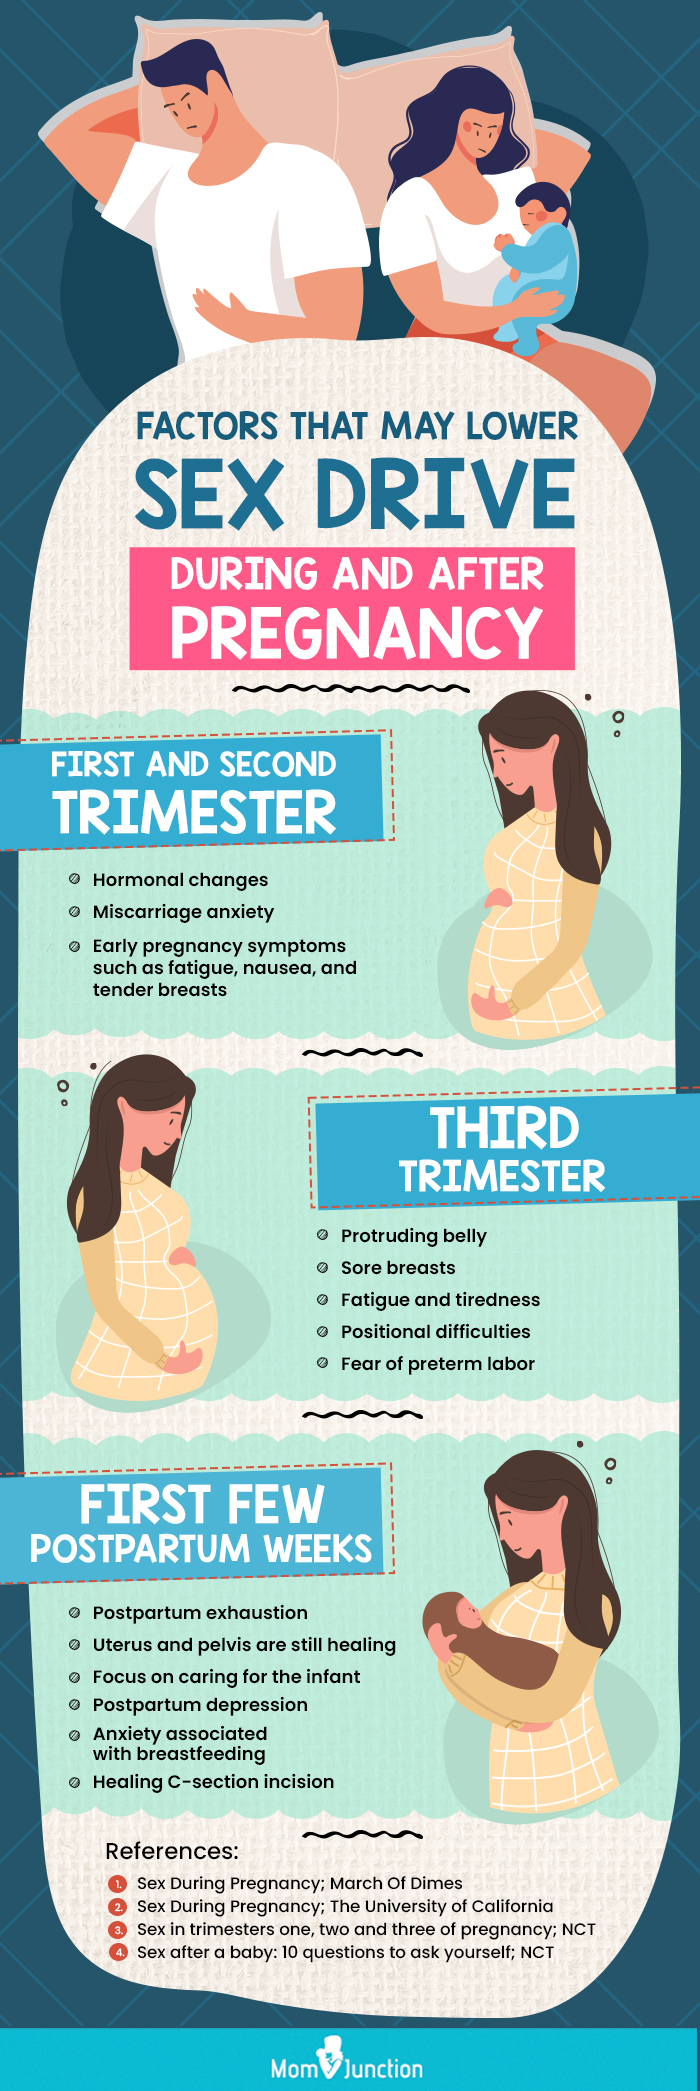 factors that may lower sex drive during and after pregnancy [infographic]